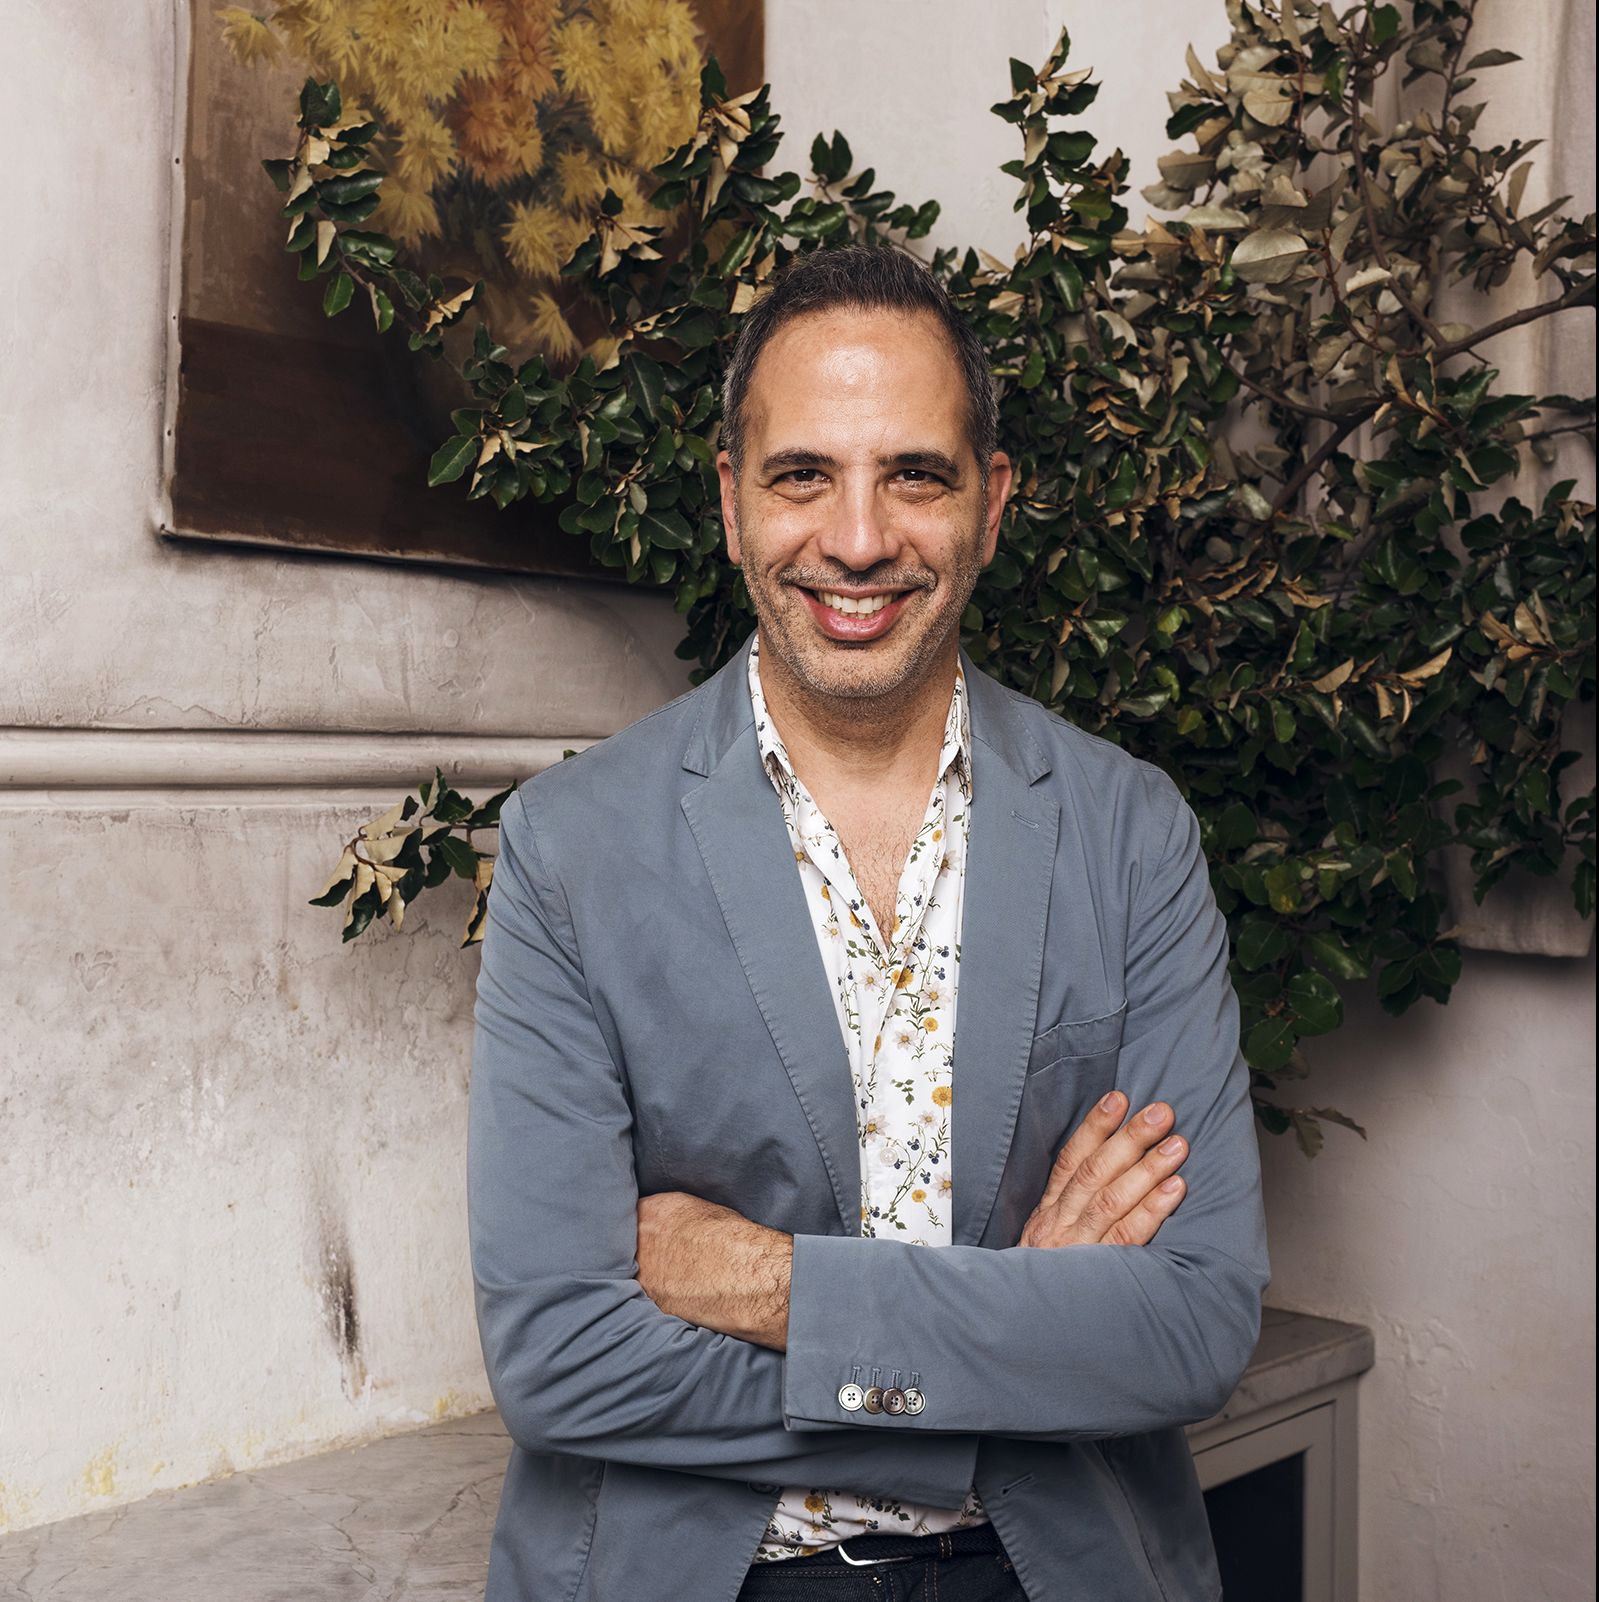 australia out israeli british chef, yotam ottolenghi, is at fred's restaurant in paddington, sydney, where he is the guest at a good food event for the sydney morning herald, january 29, 2019 photo by james brickwoodfairfax media via getty images via getty images